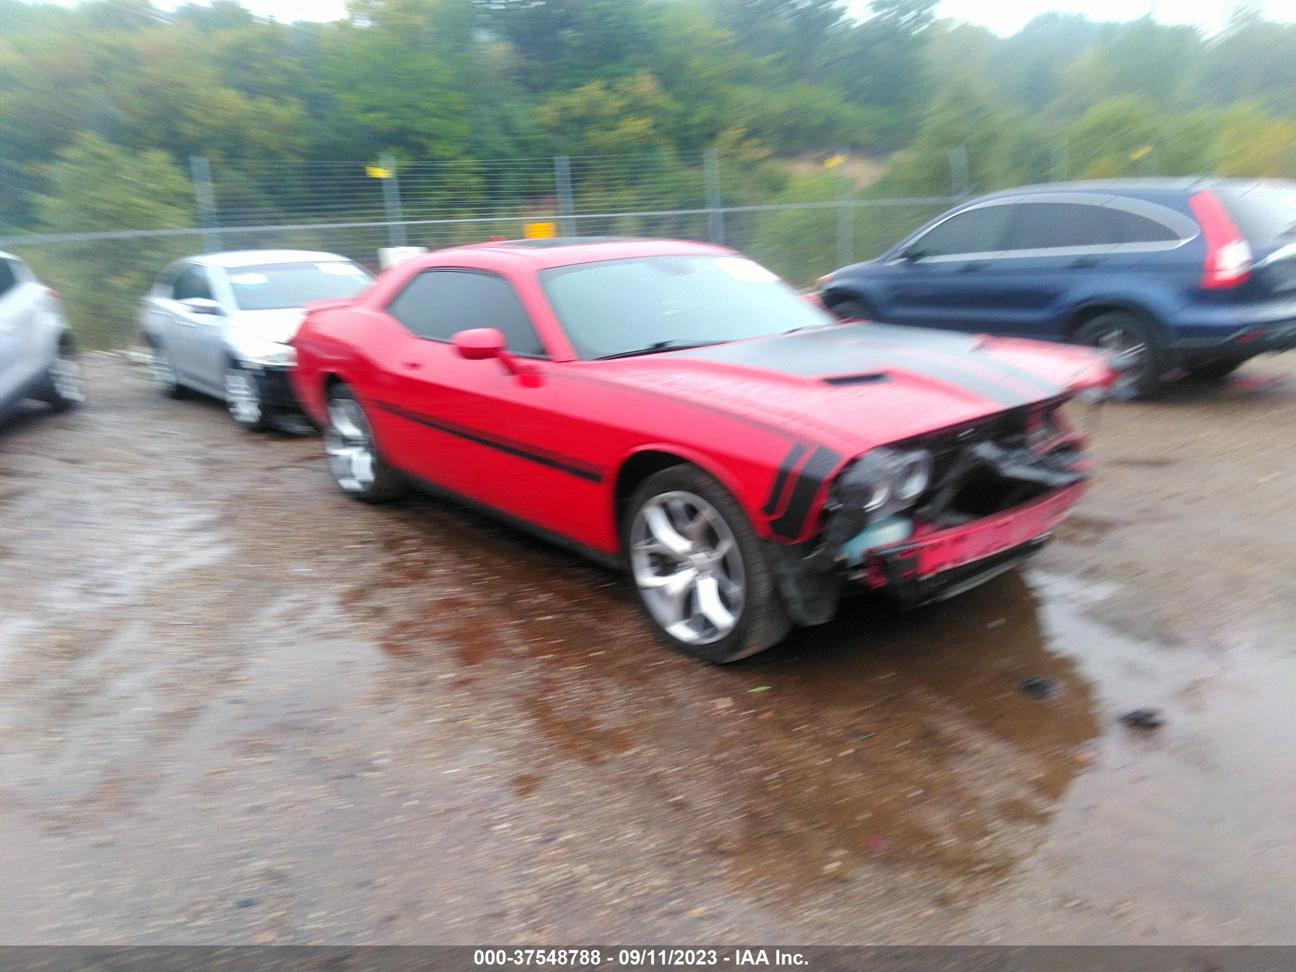 vin: 2C3CDZBG3FH723785 2C3CDZBG3FH723785 2015 dodge challenger 3600 for Sale in 60118, 605 Healy Road, East Dundee, USA